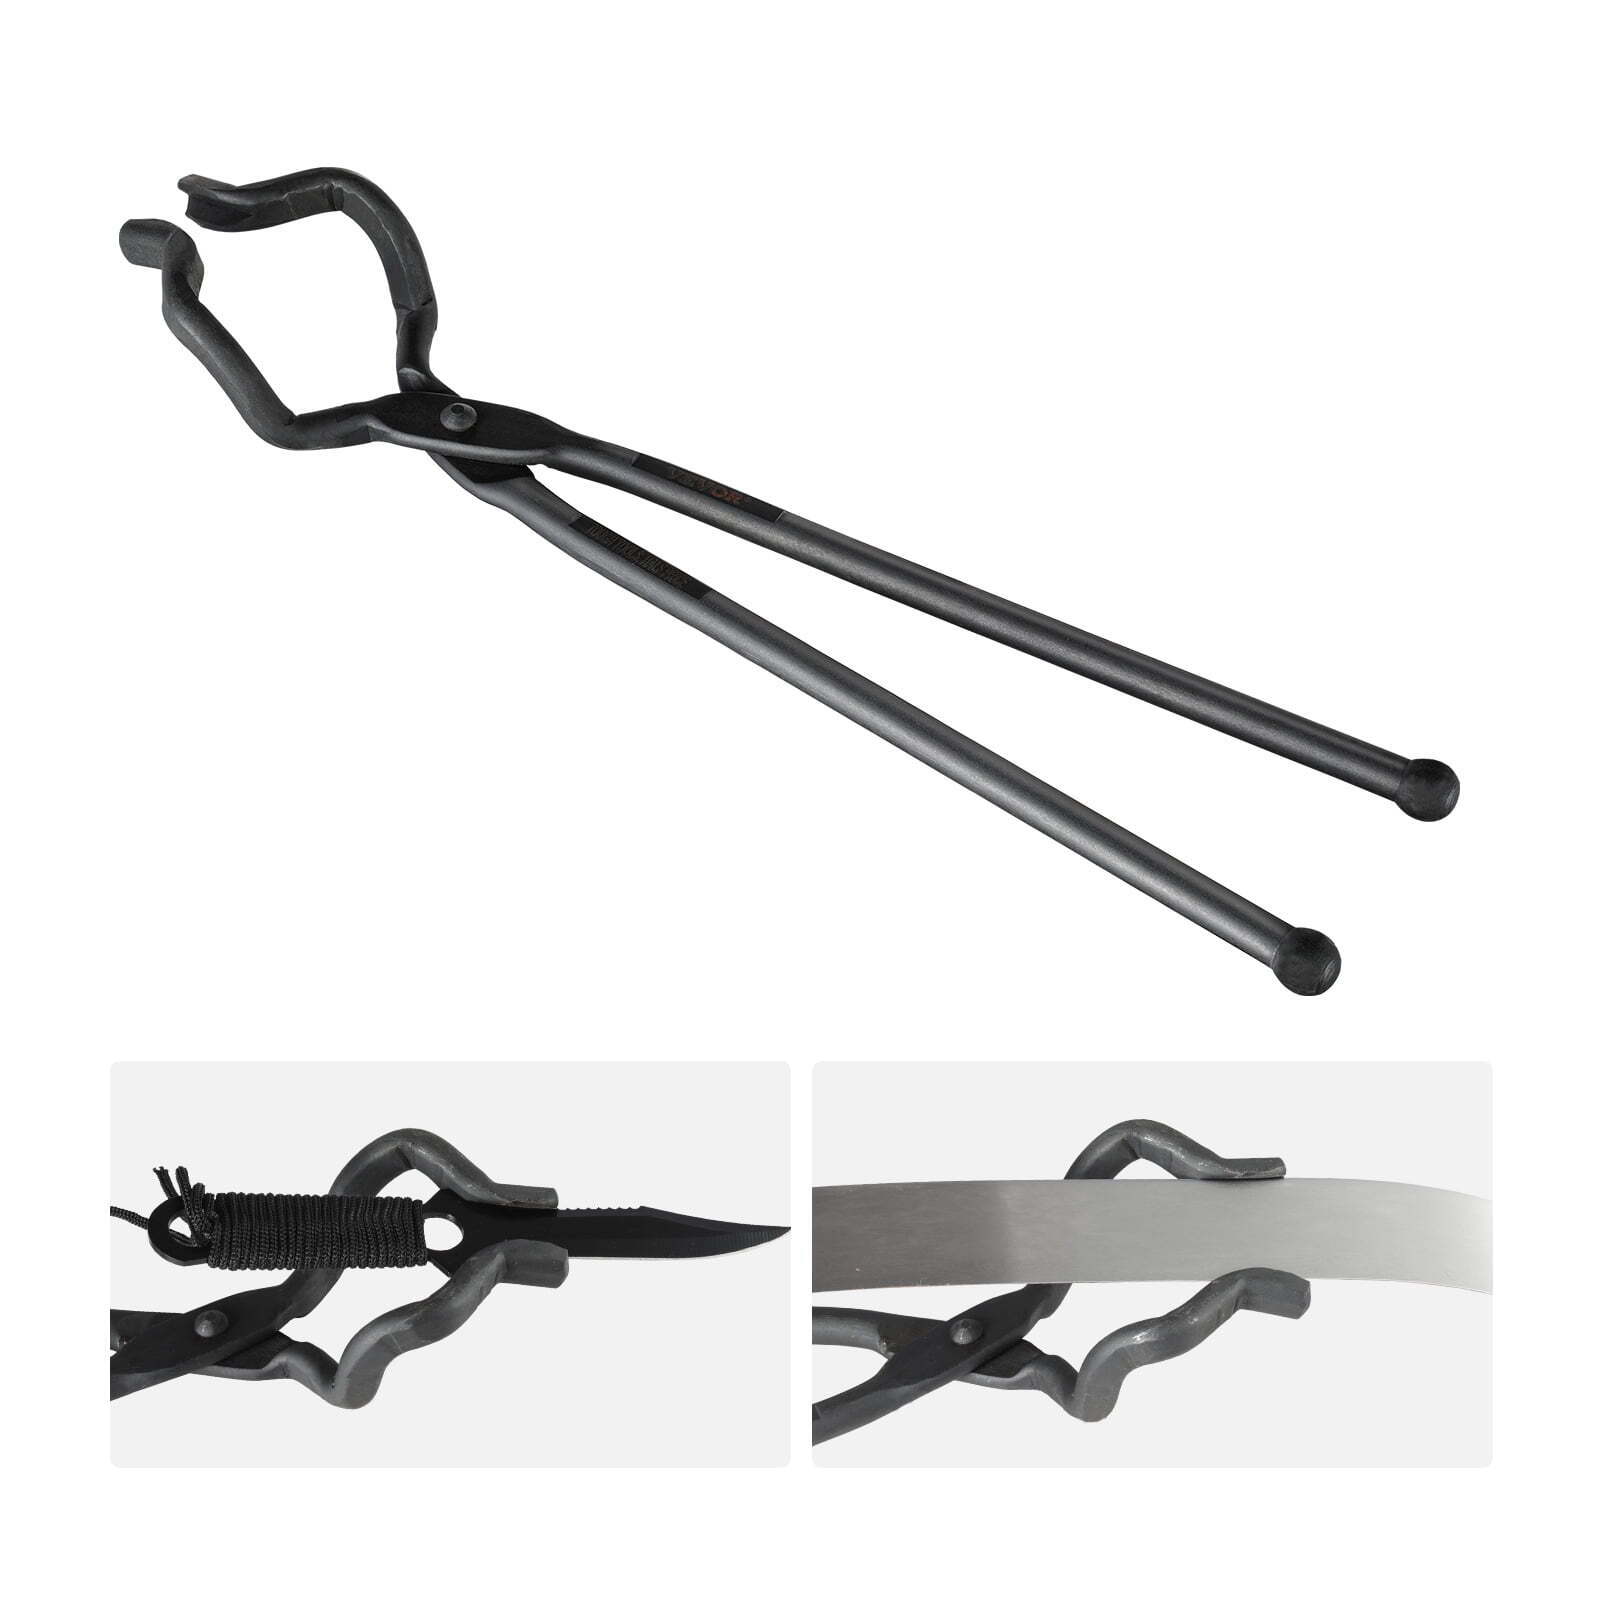 Blacksmith Tongs, 18” Z V-Bit Tongs, Carbon Steel Forge Tongs with A3 Steel